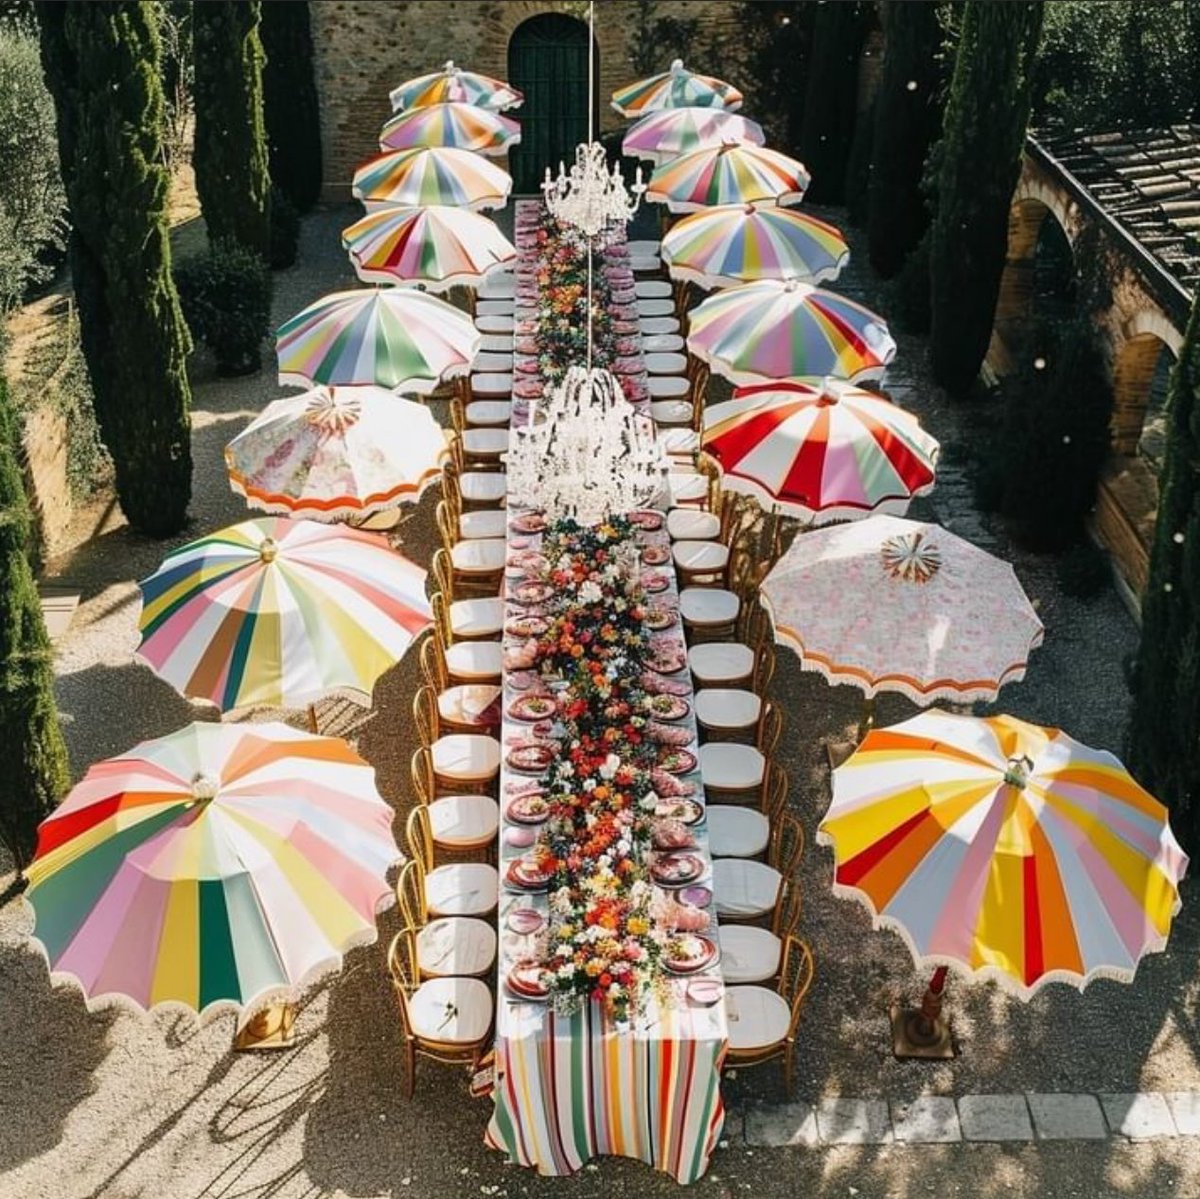 Summer captured in a tablescape.